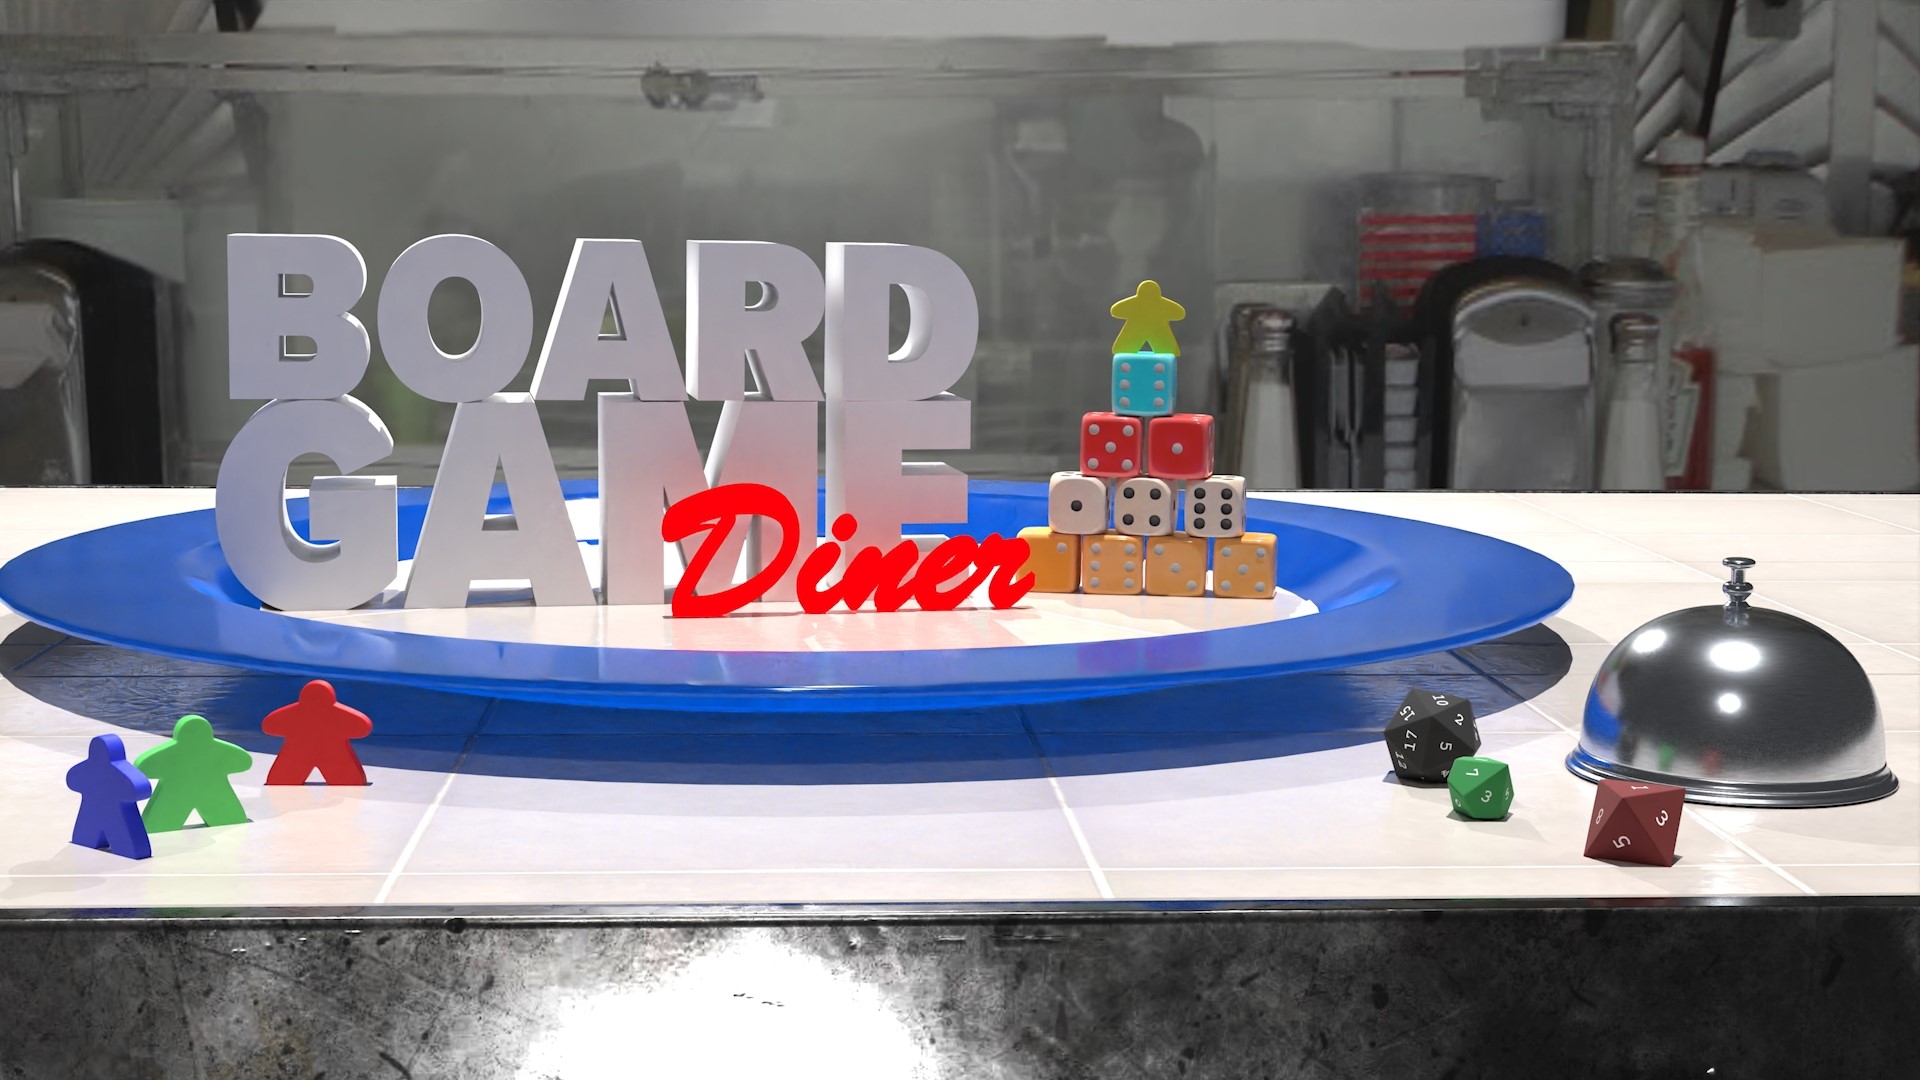 Promotional overview of the Board Game Diner show. Pushing people to search the menu for the show.